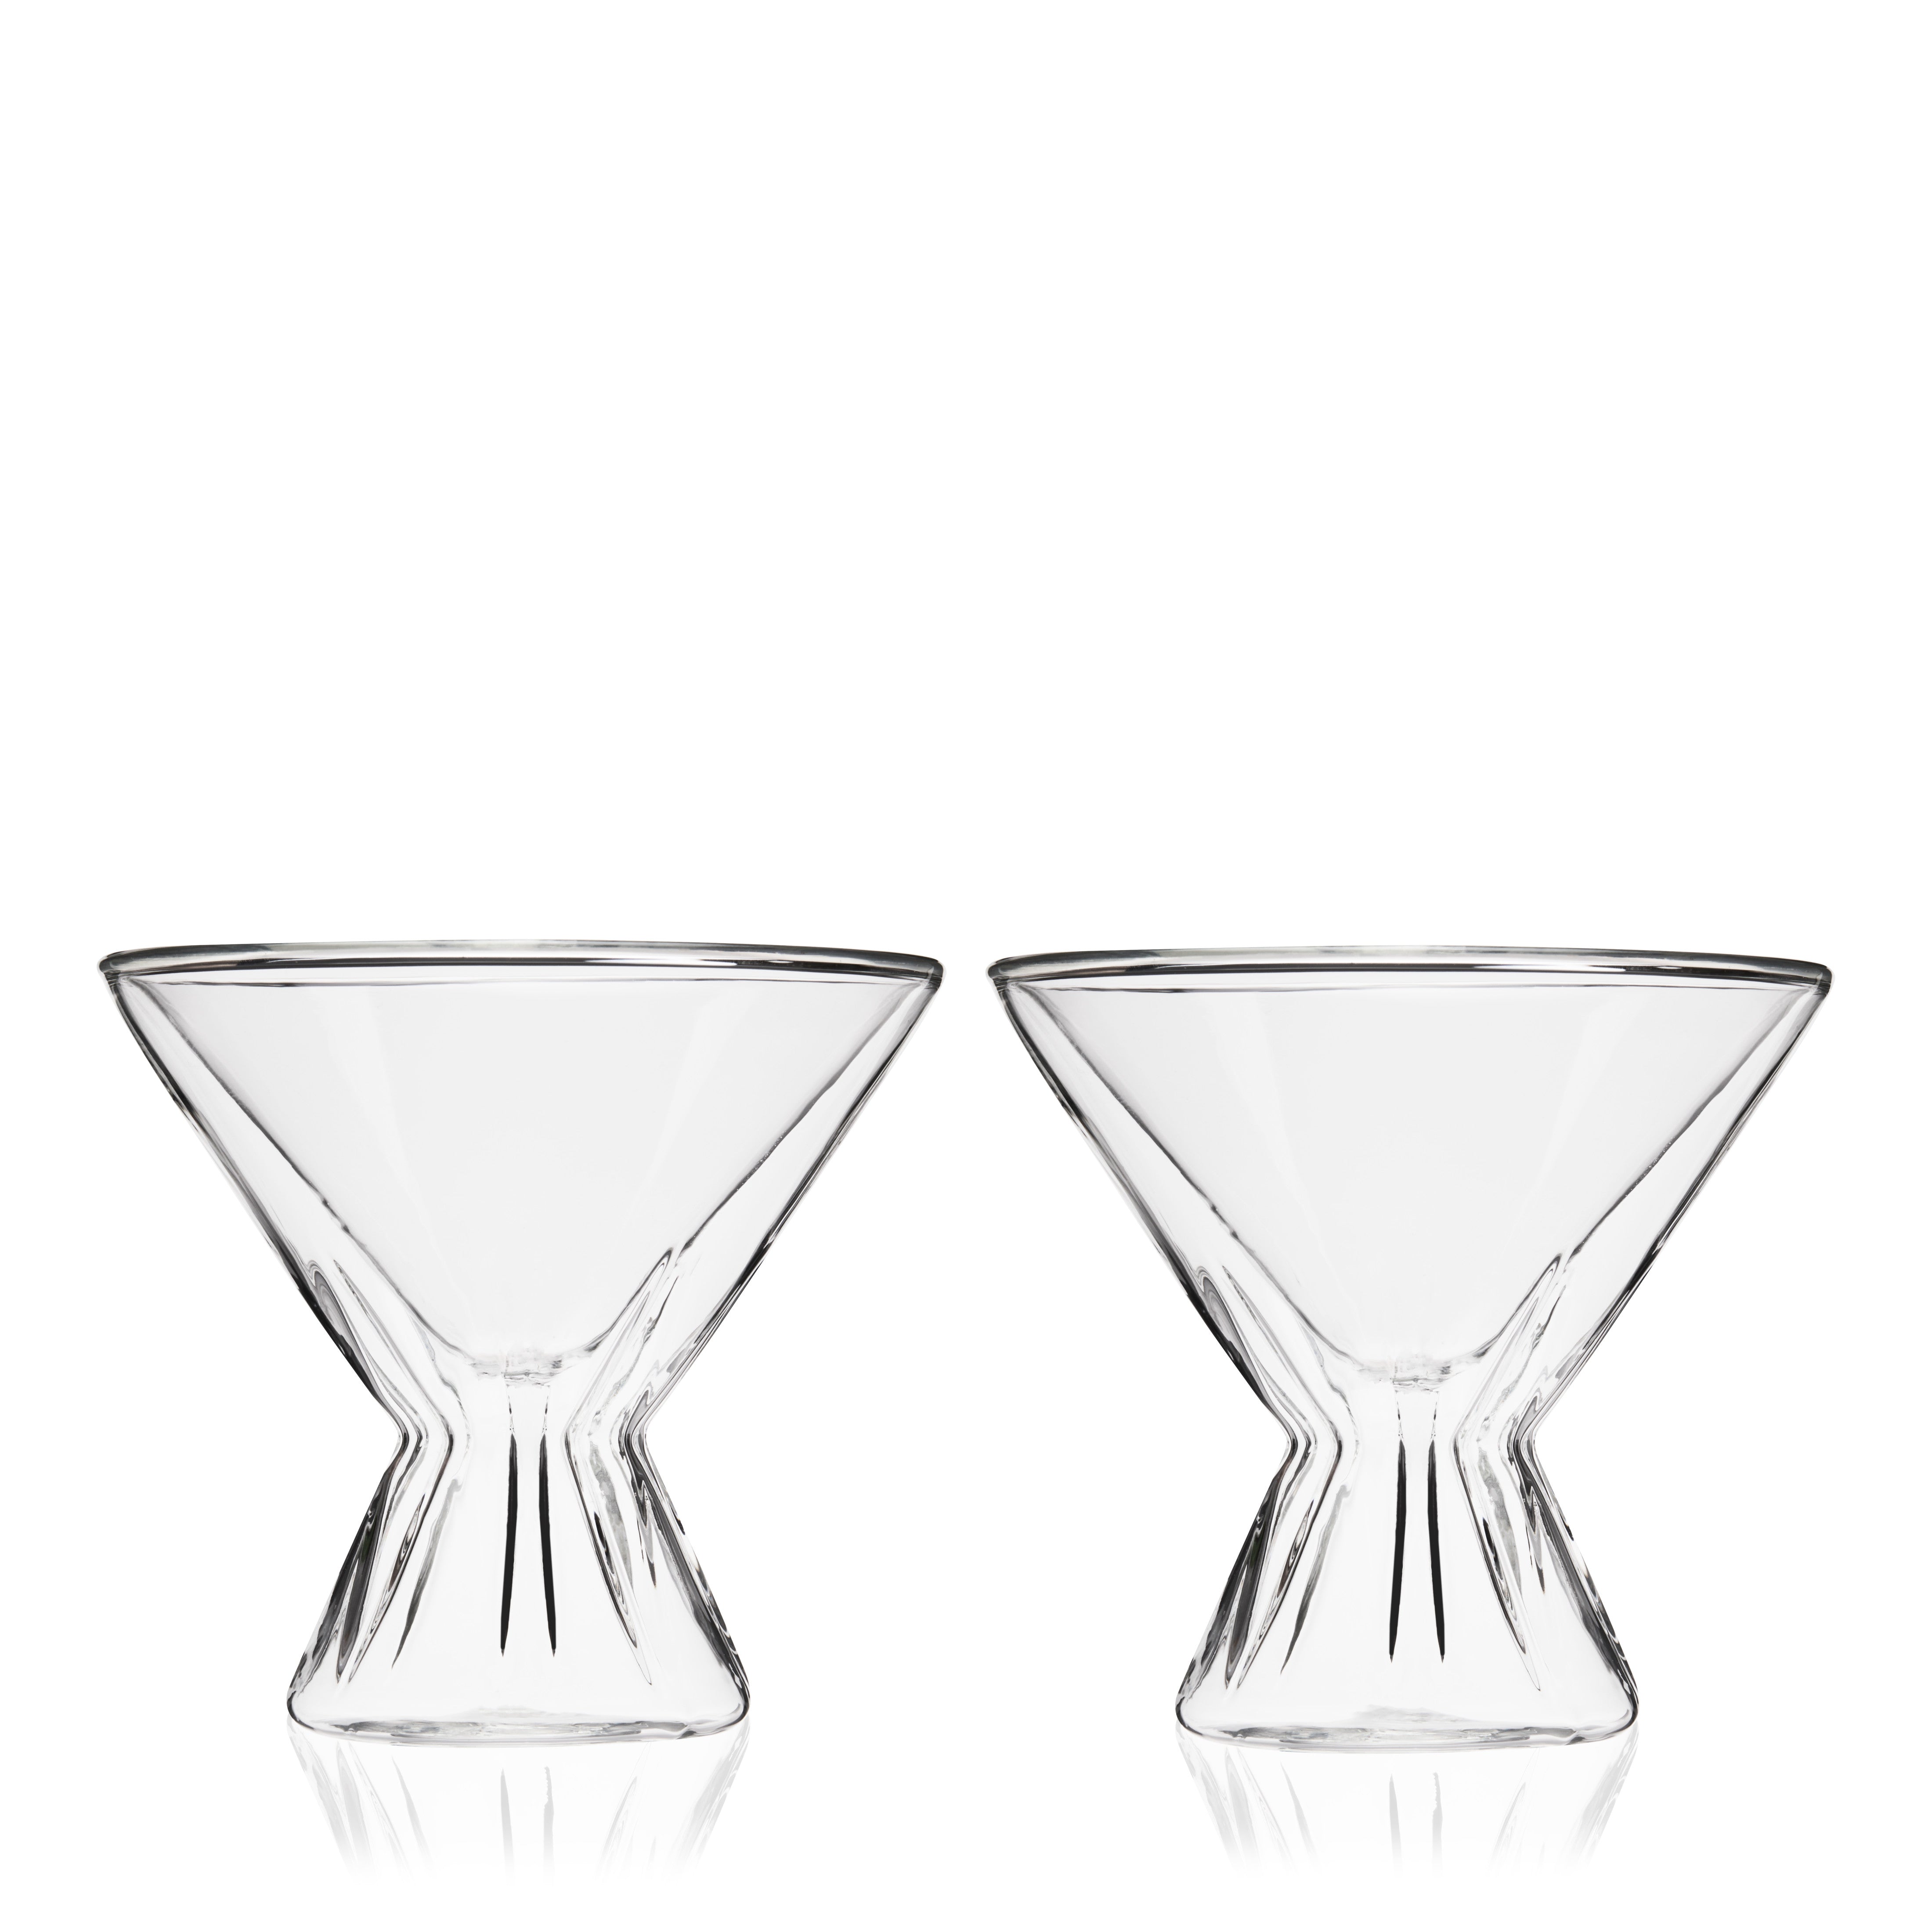 Ysell Insulated Martini Glasses,Set of 2,8 oz,Double Walled Cocktail  Glasses,Lead-Free Glass Cups Great for Cold or Hot Drinks